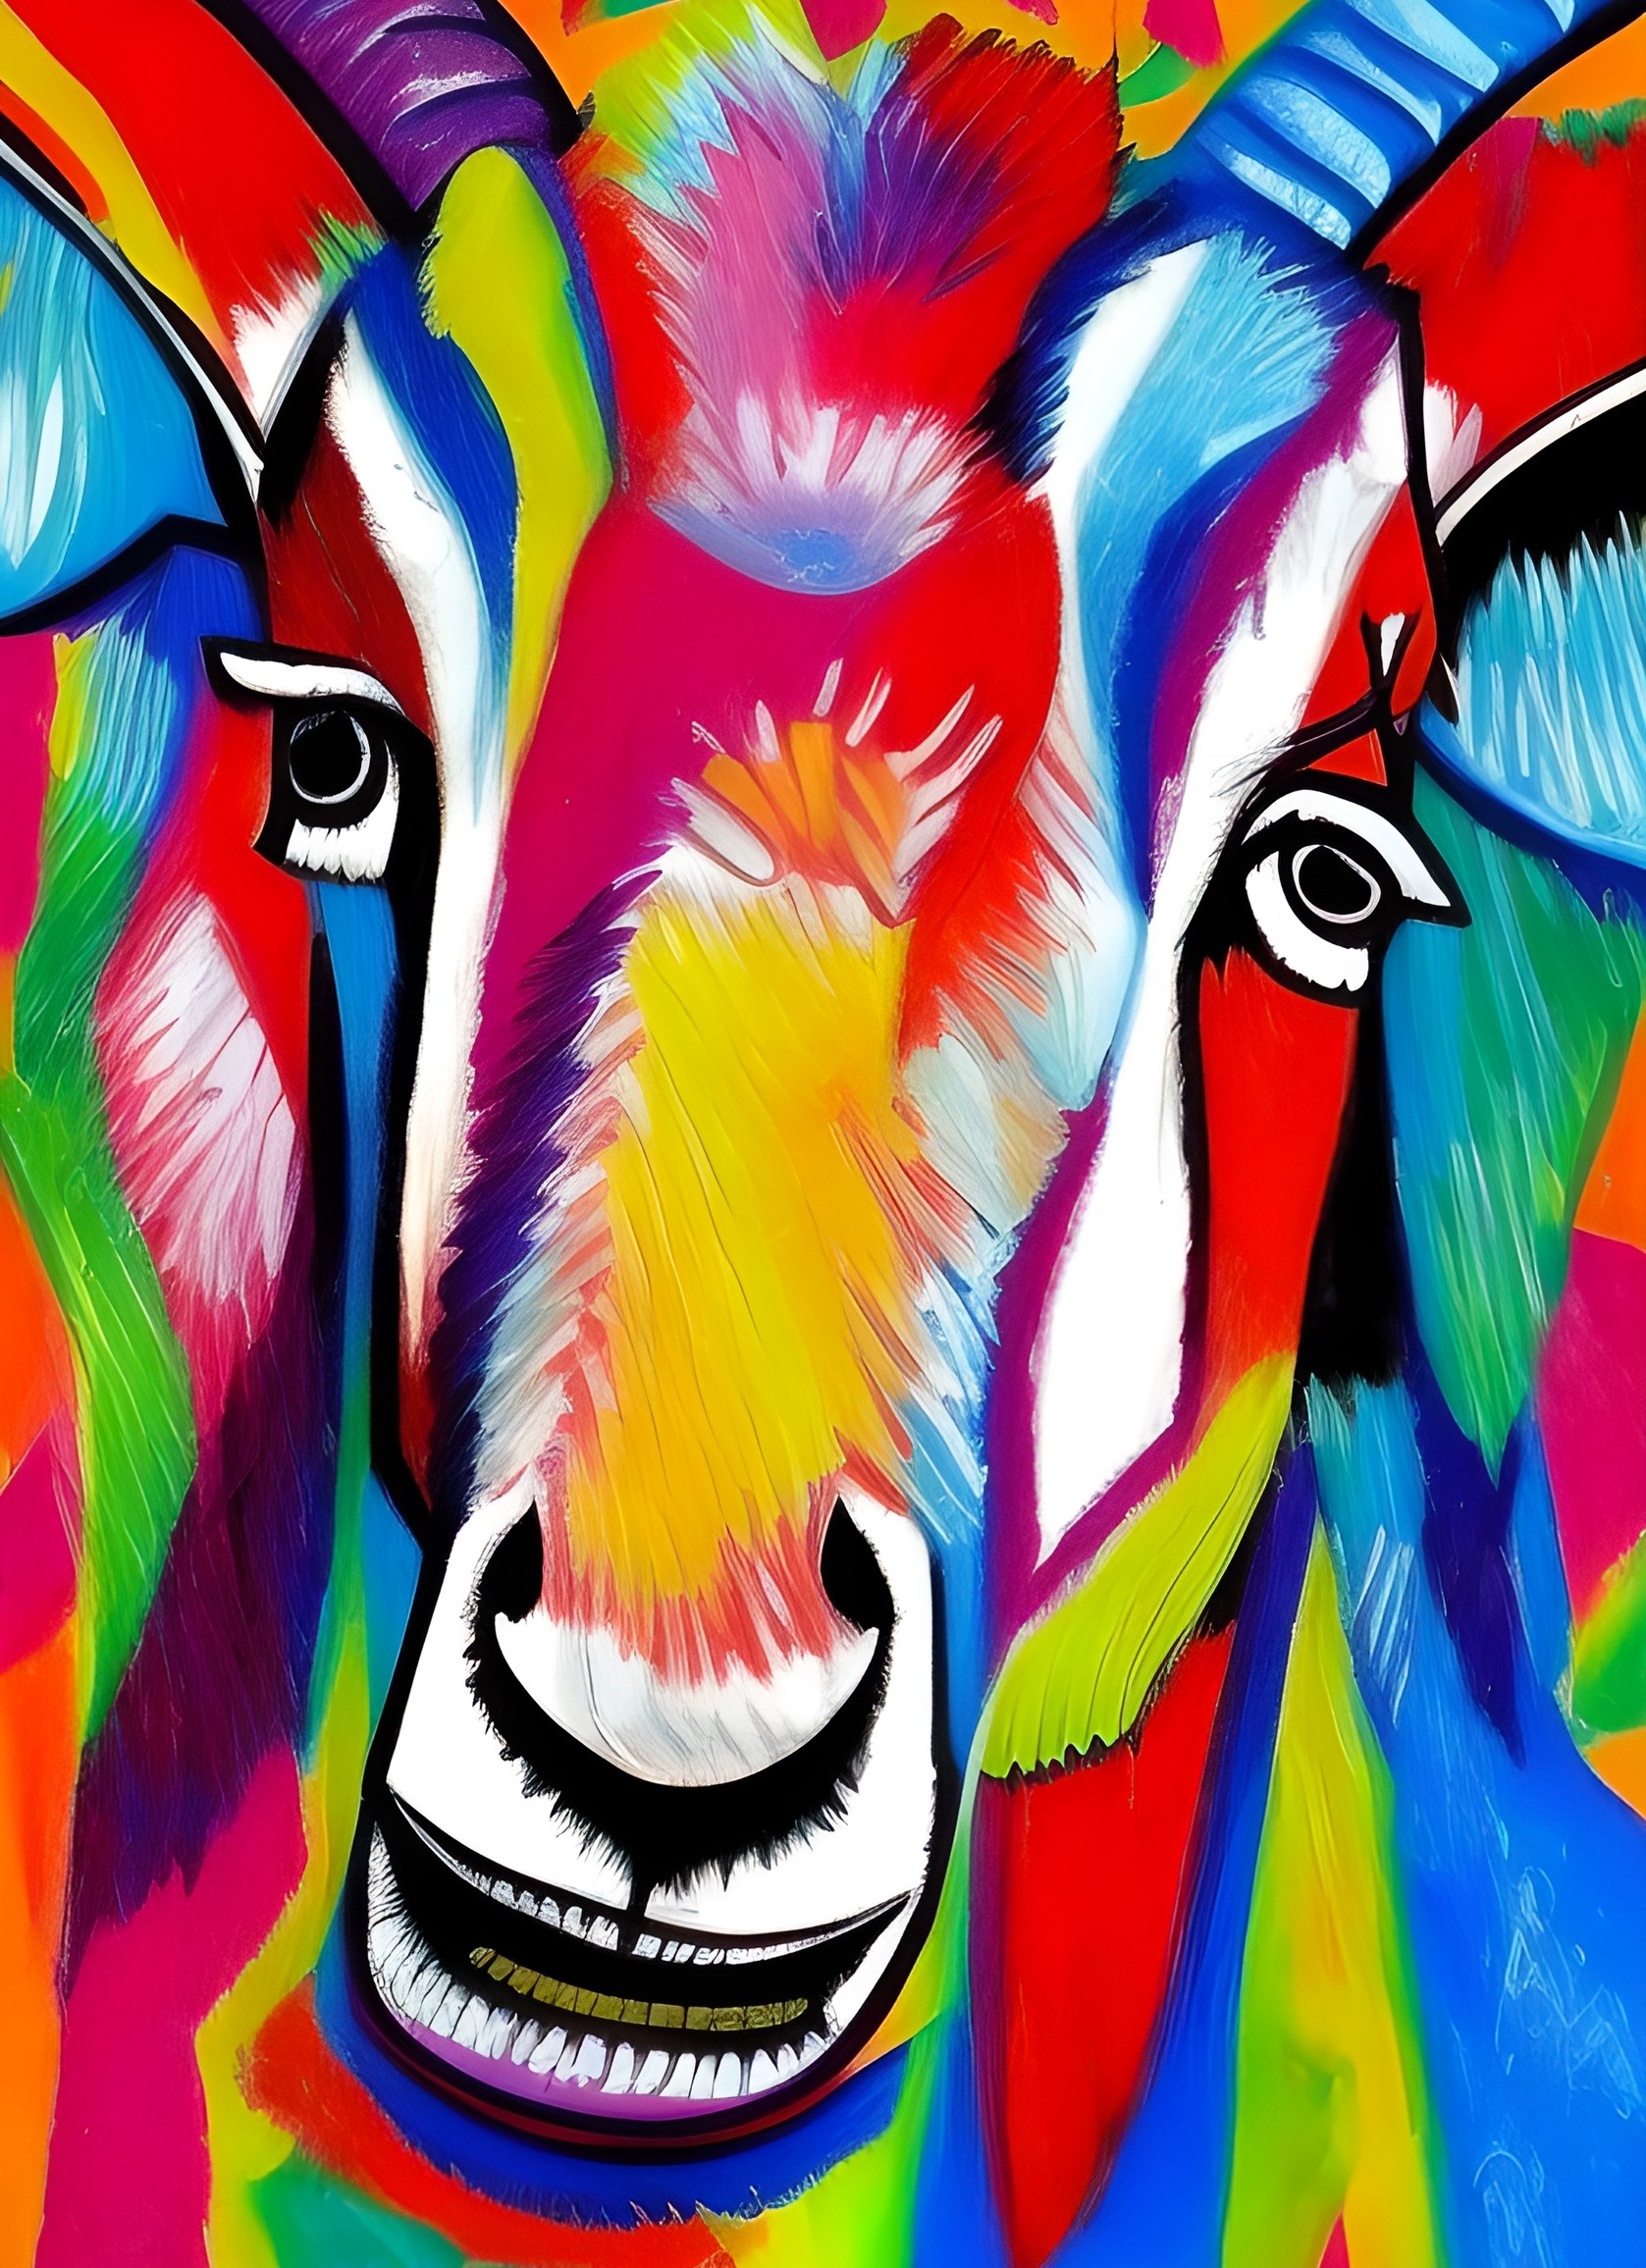 Goat Animal Colourful Abstract Art Blank Greeting Card